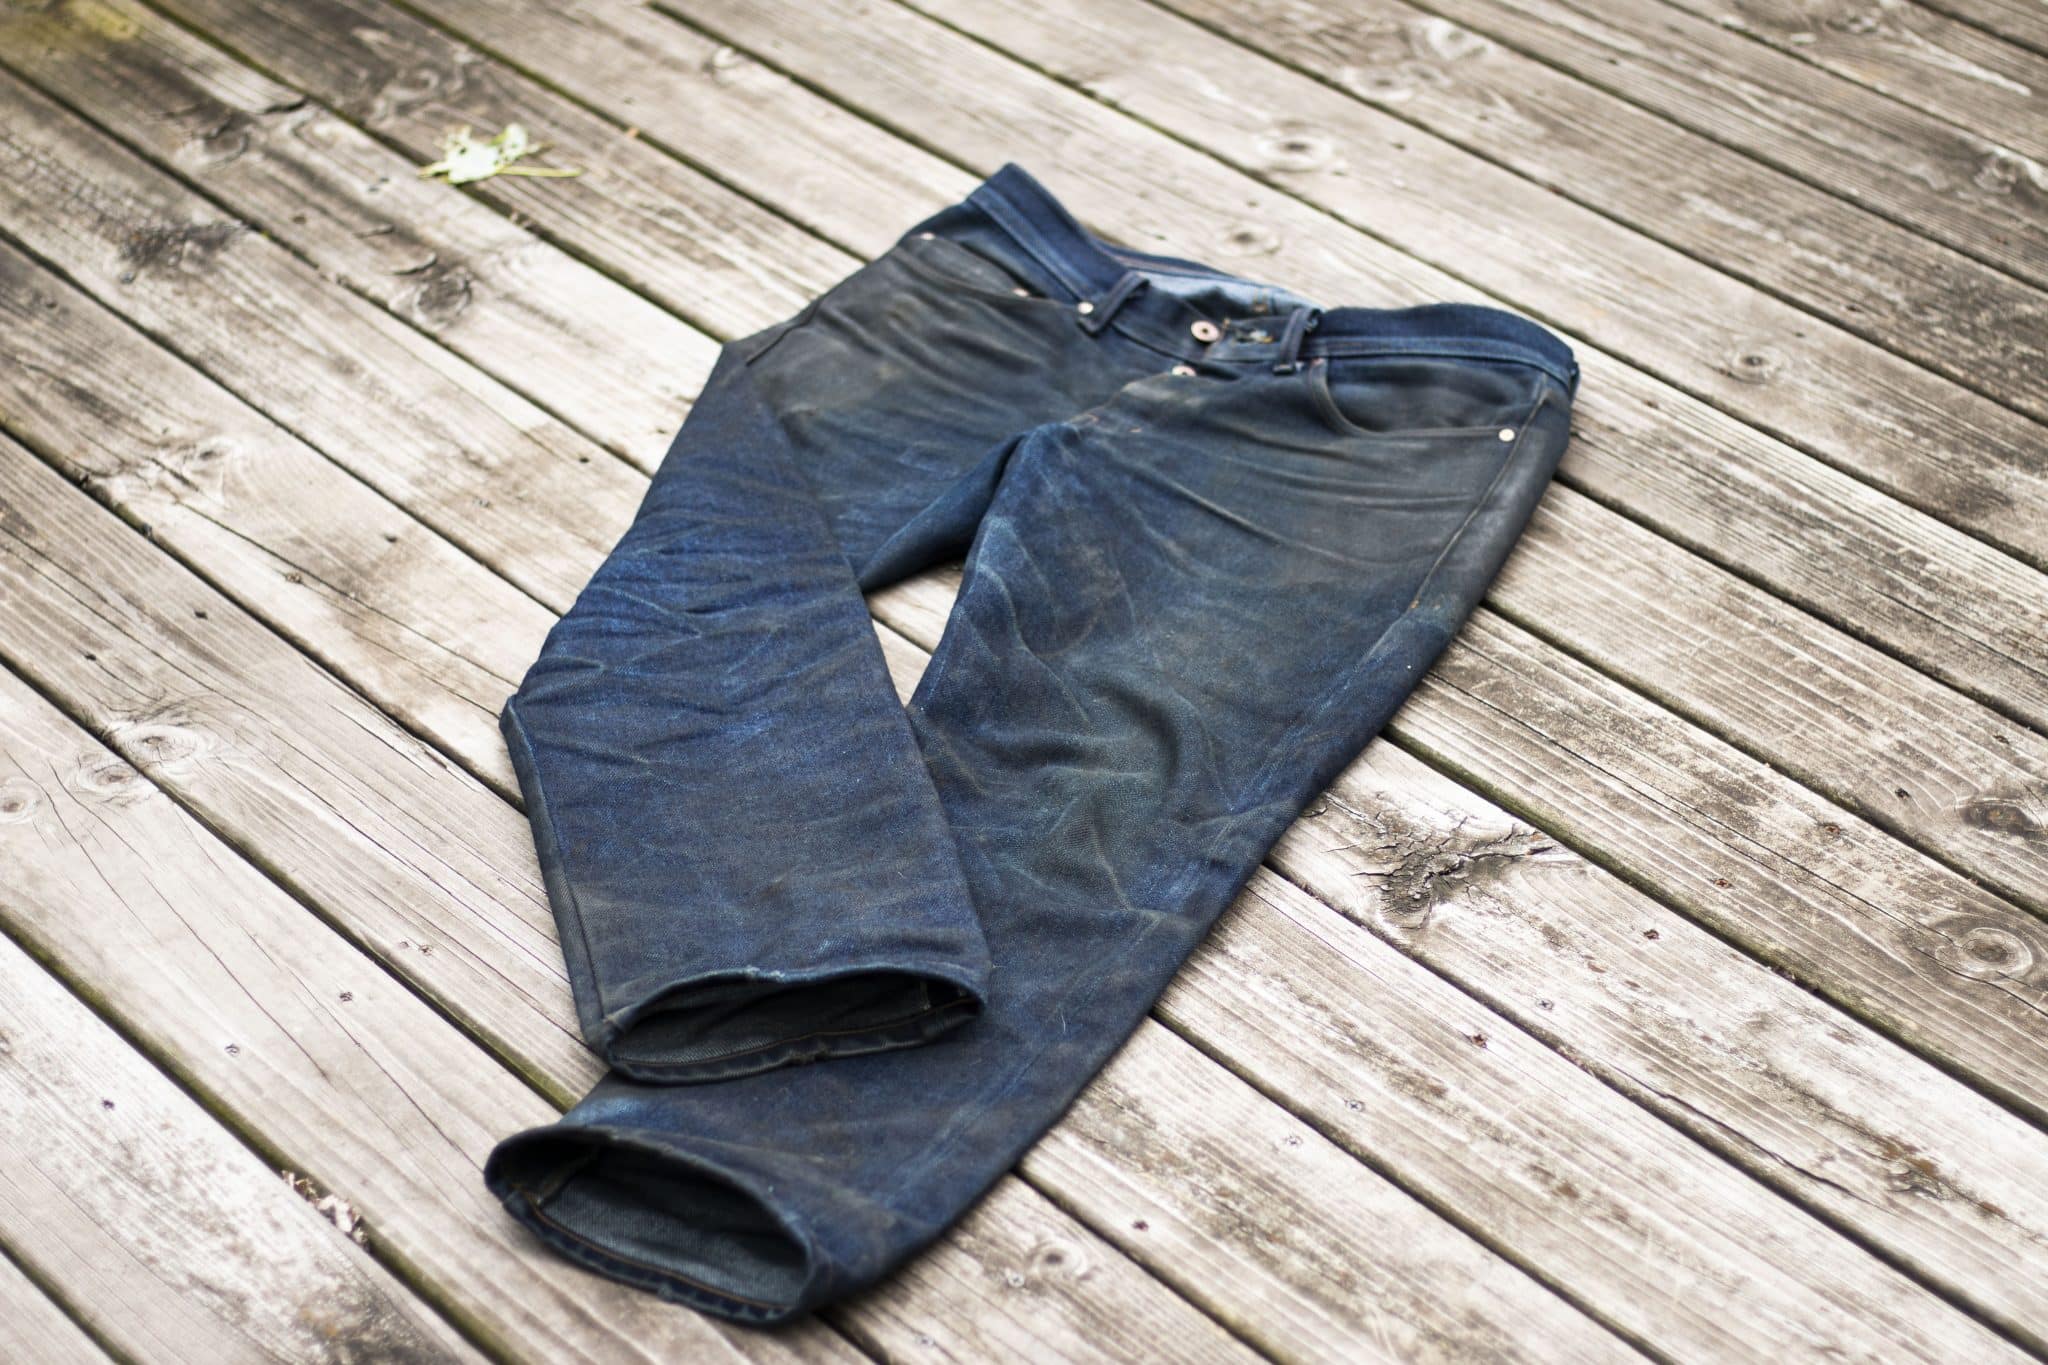 Buying Jeans for Fades? Don't Fall for These Fading Myths